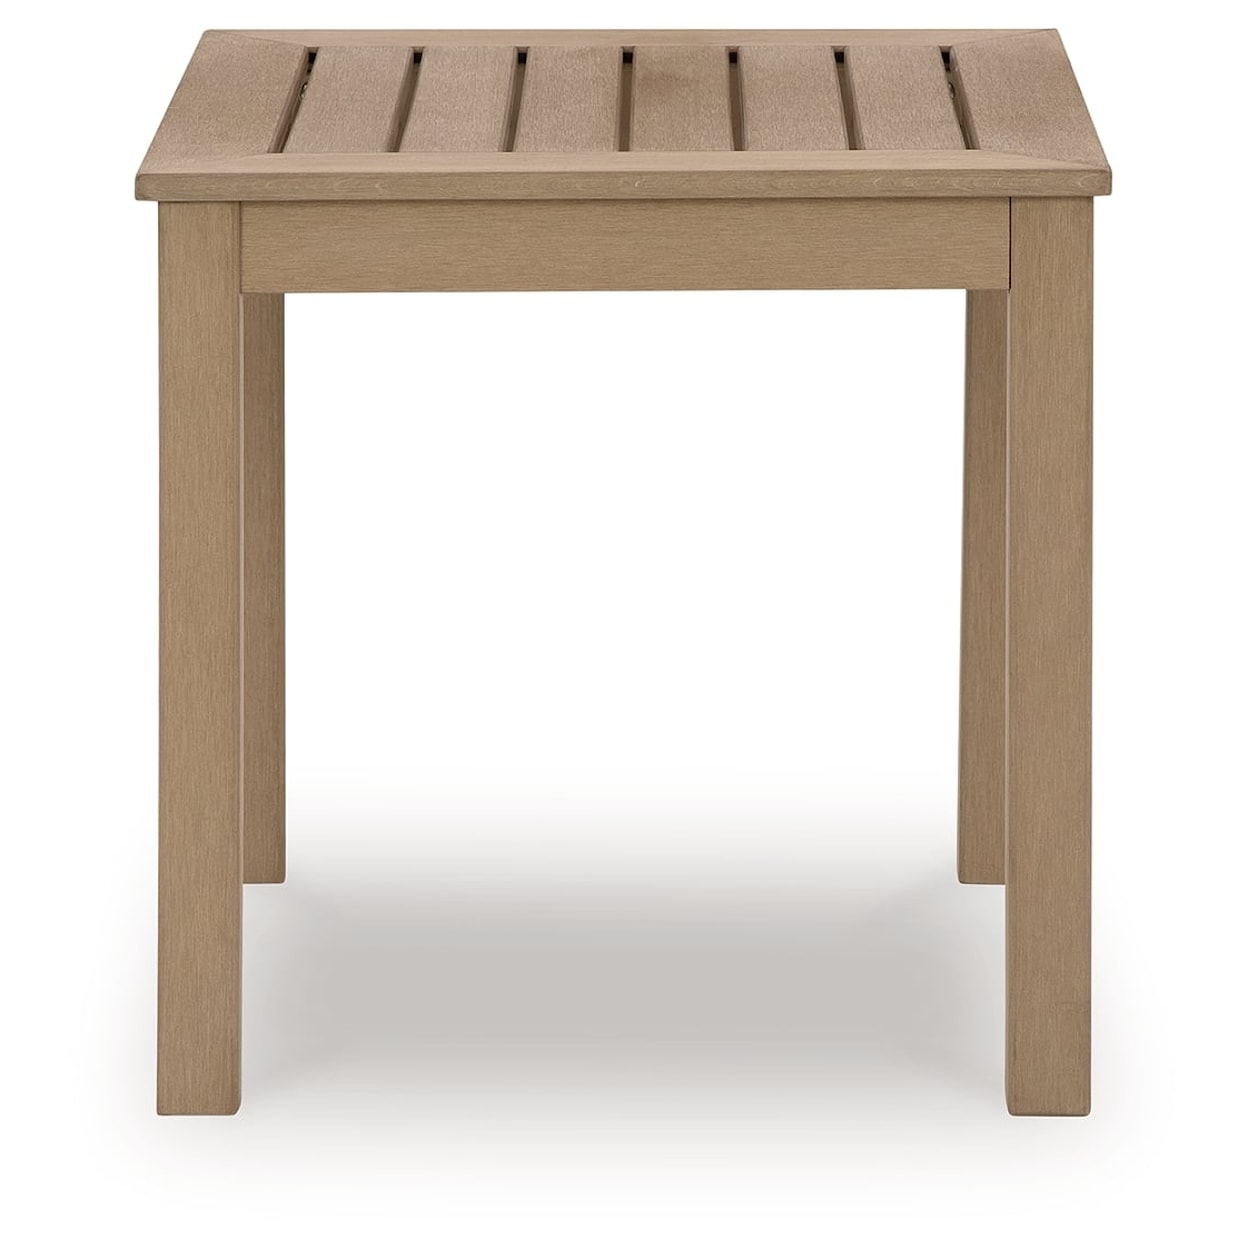 Ashley Furniture Signature Design Hallow Creek Outdoor End Table